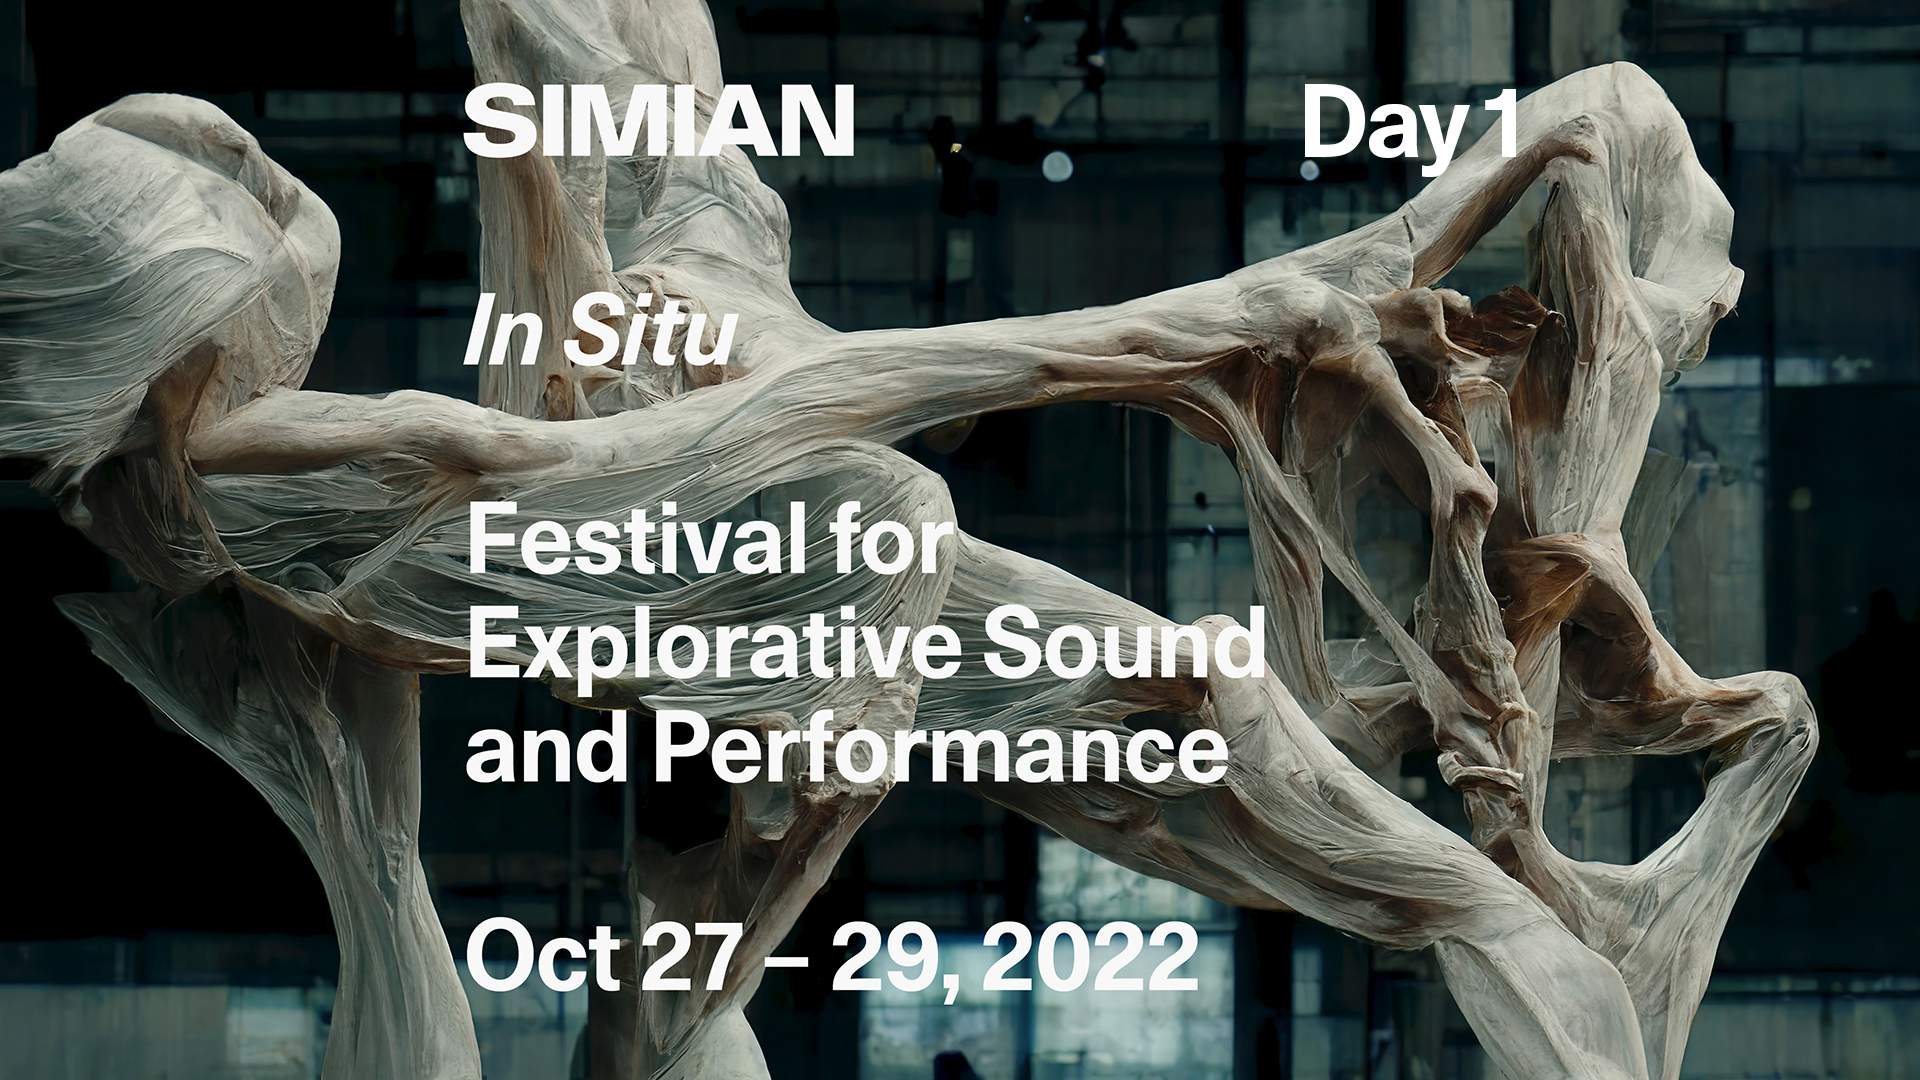 [Day 1] In Situ - Festival for Explorative Sound and Performance - Página frontal